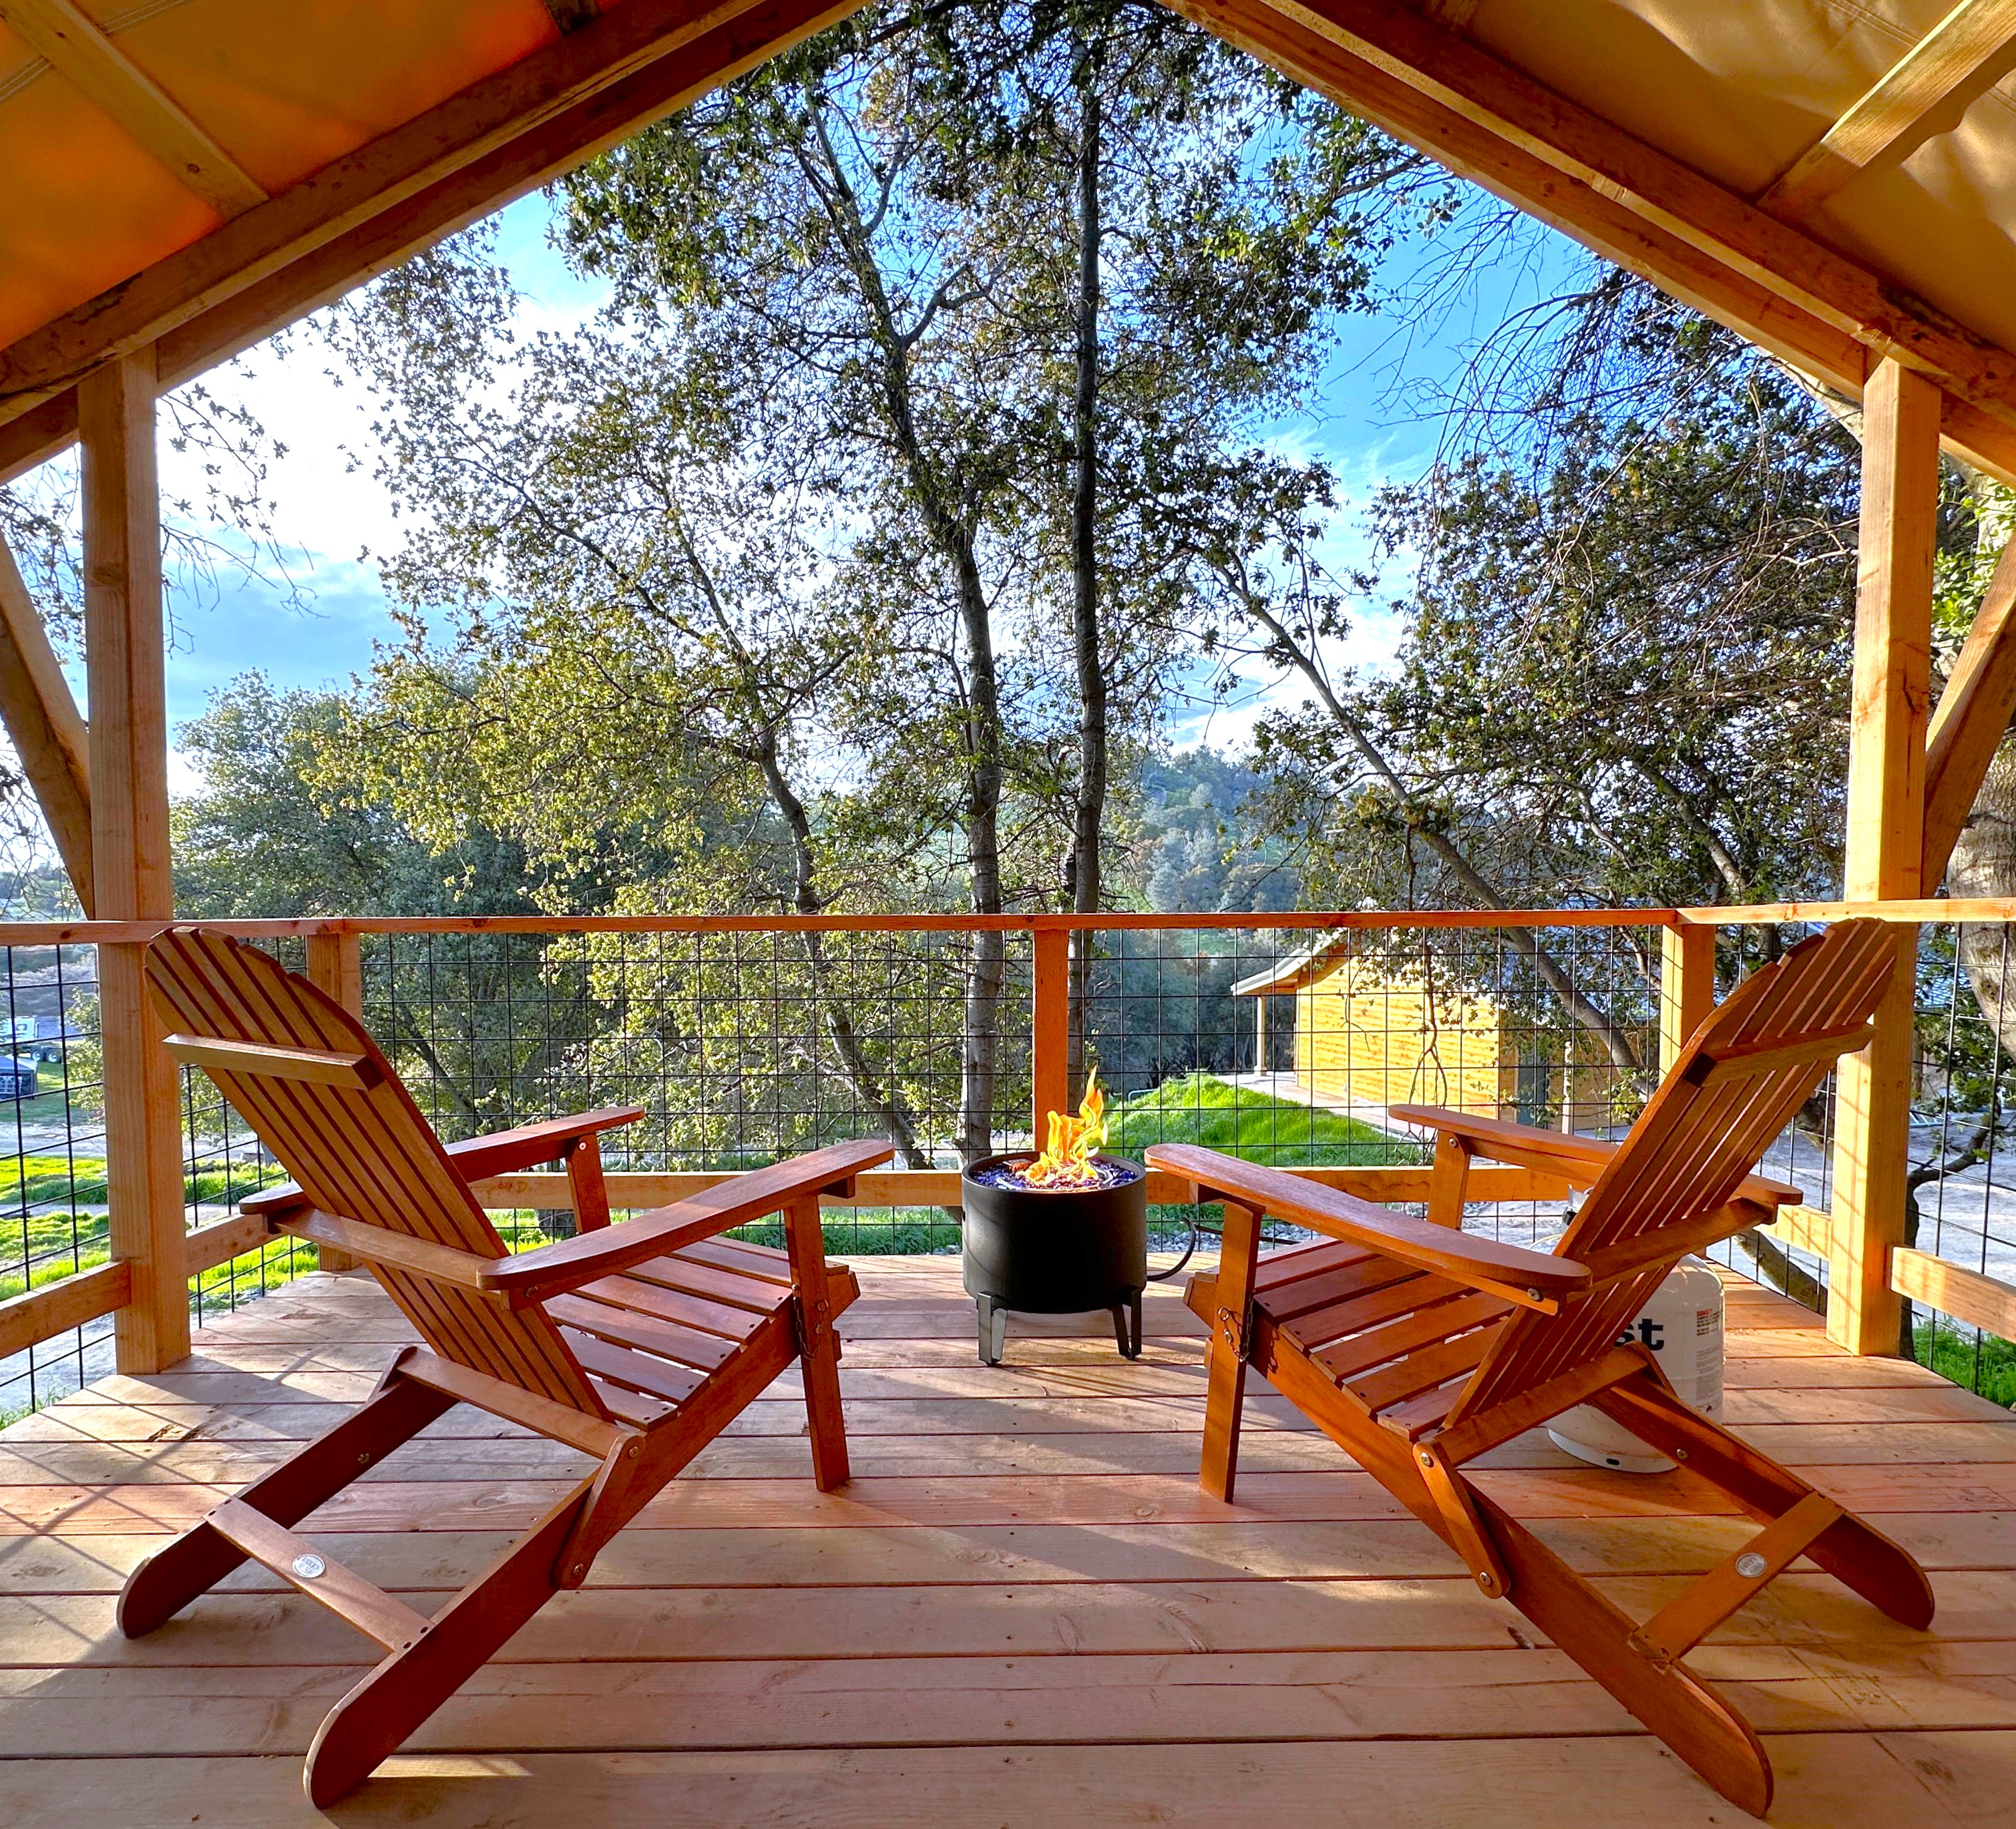 A wooden deck features two reclining chairs facing a small fire pit. Behind is a view of trees and a distant valley, framed by a rustic, open wooden structure.